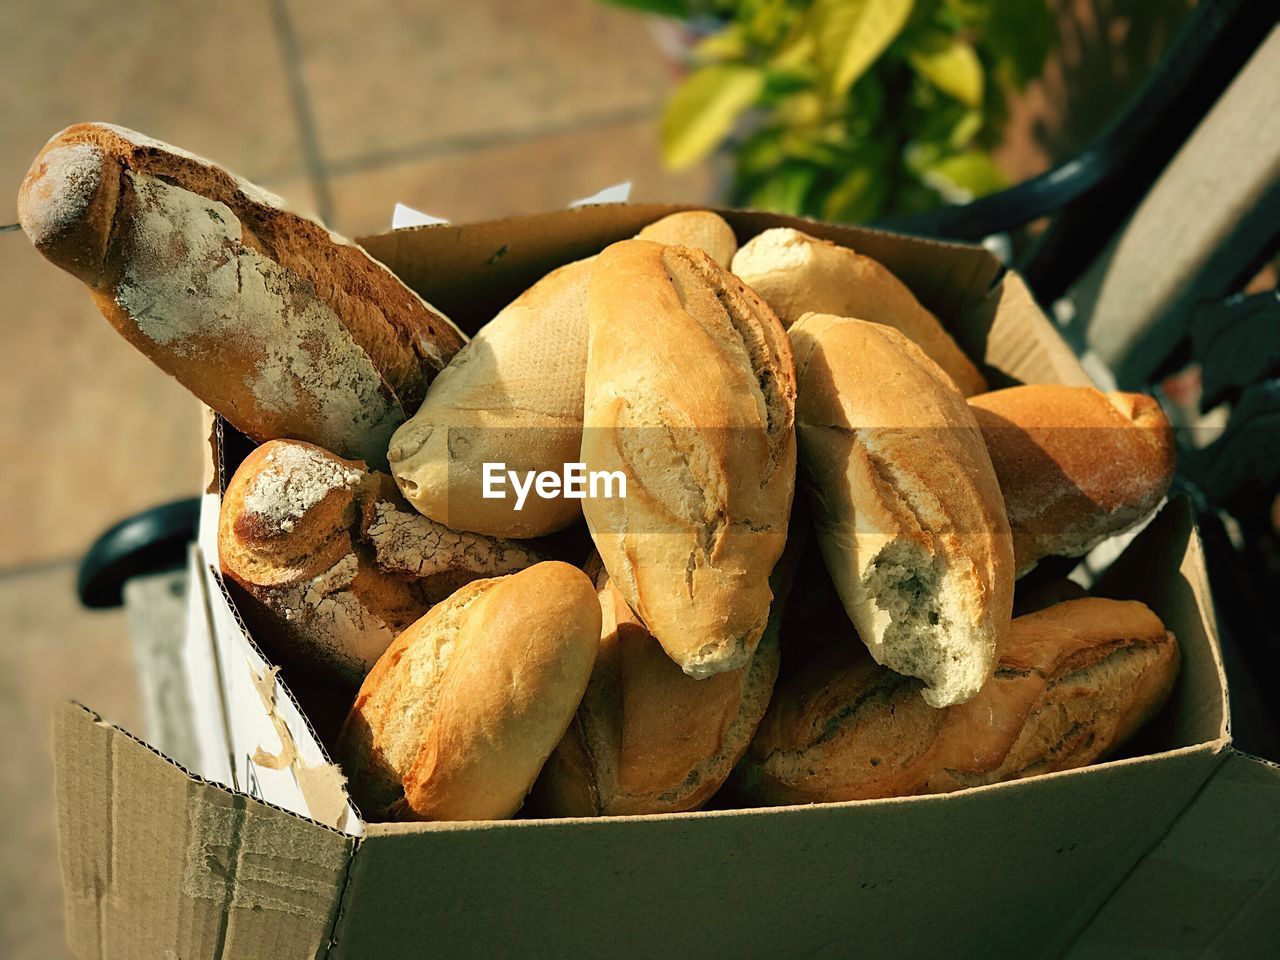 High angle view of bread in paper bag on table